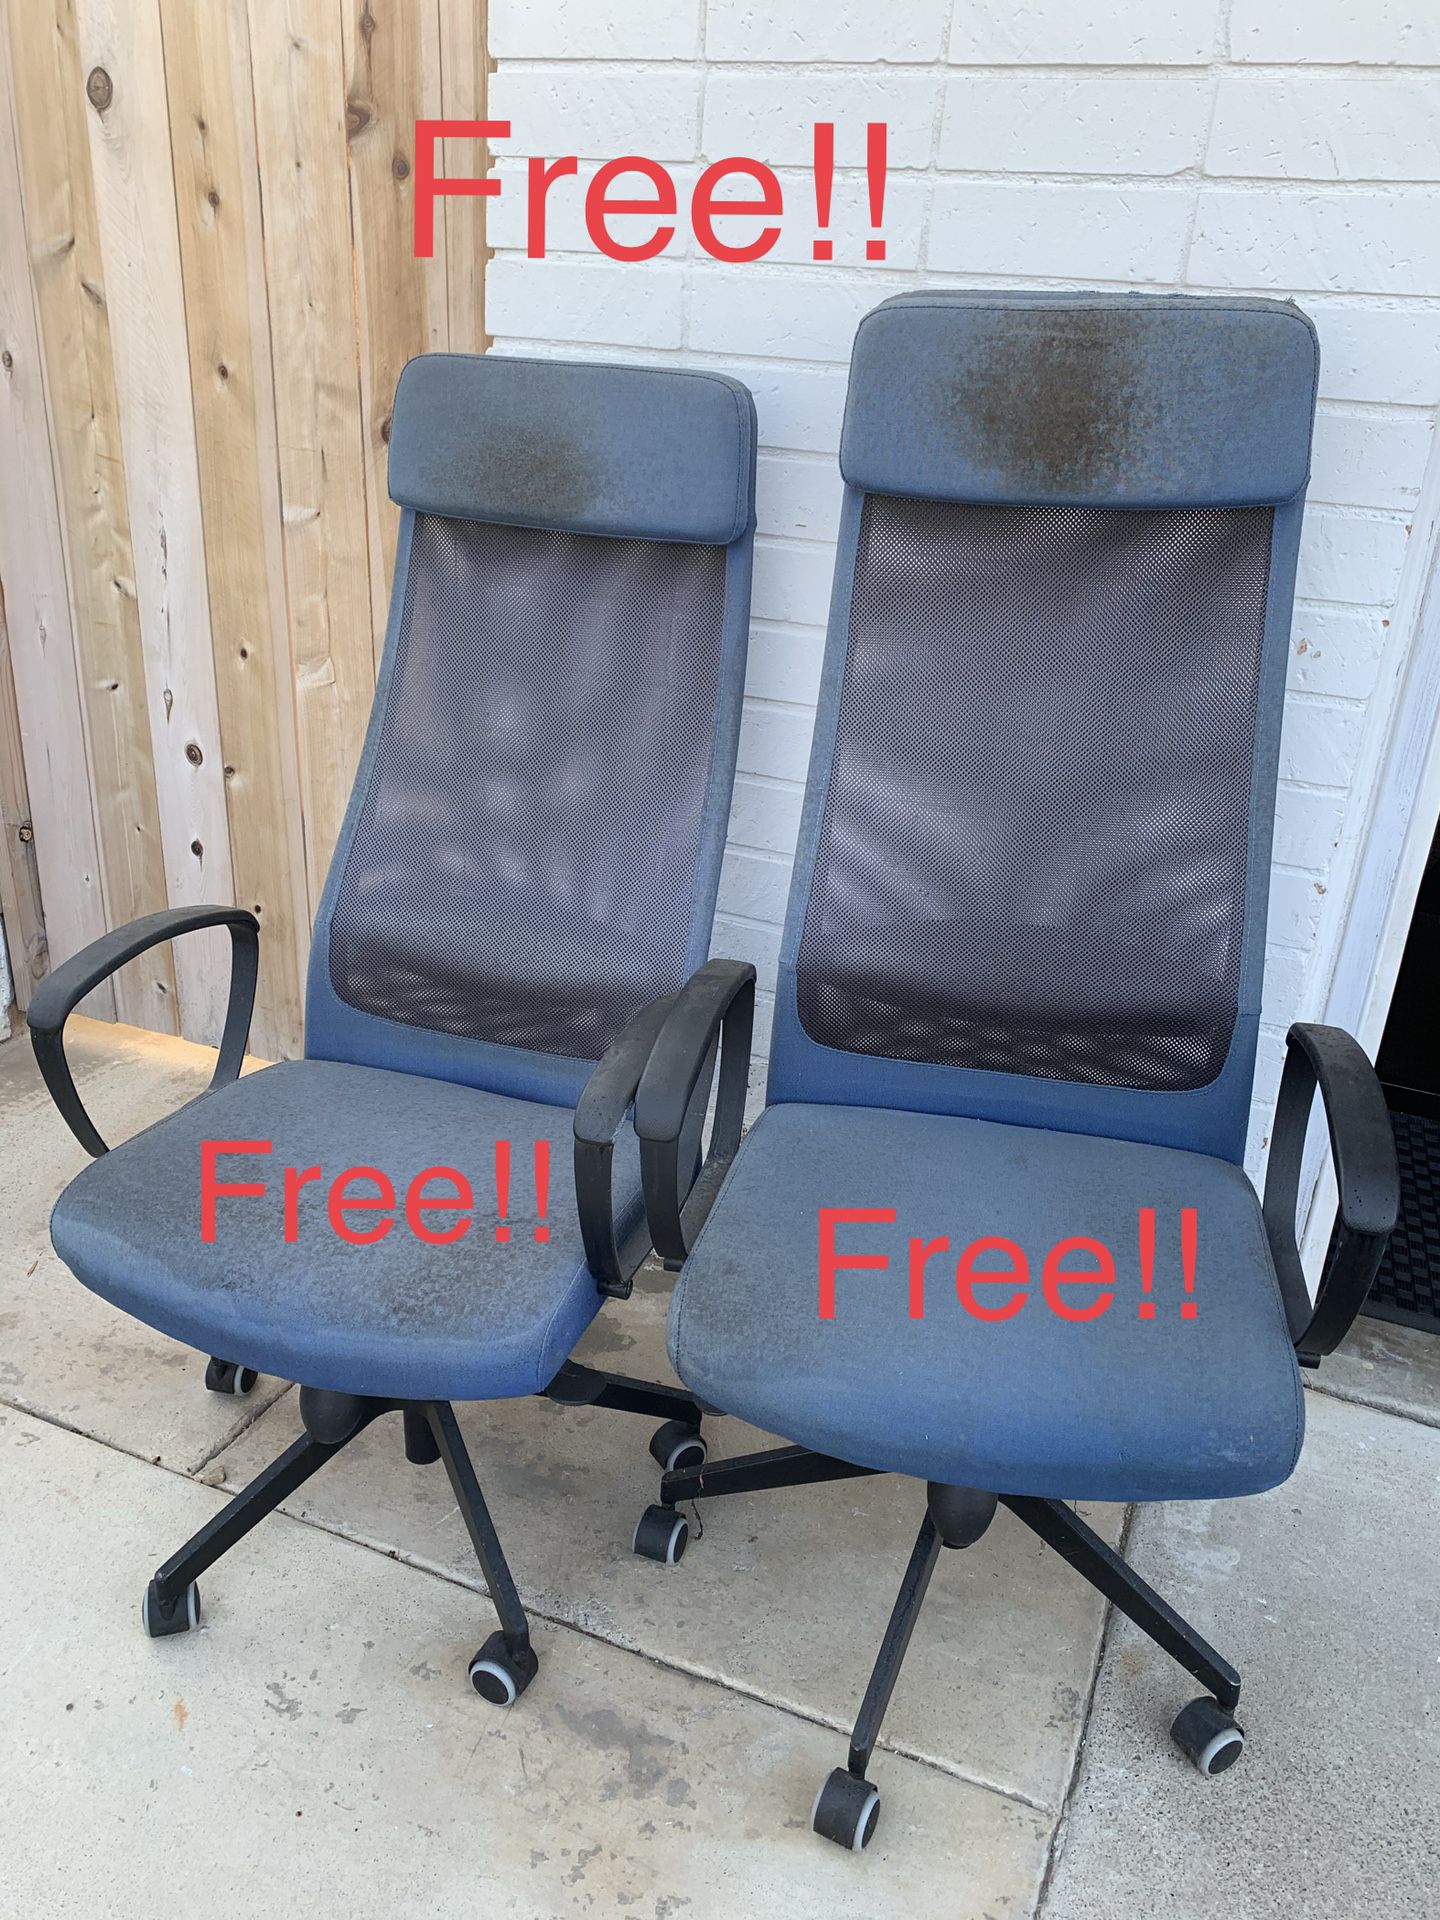 FREE!! Curbside Office chairs. NO Holds!